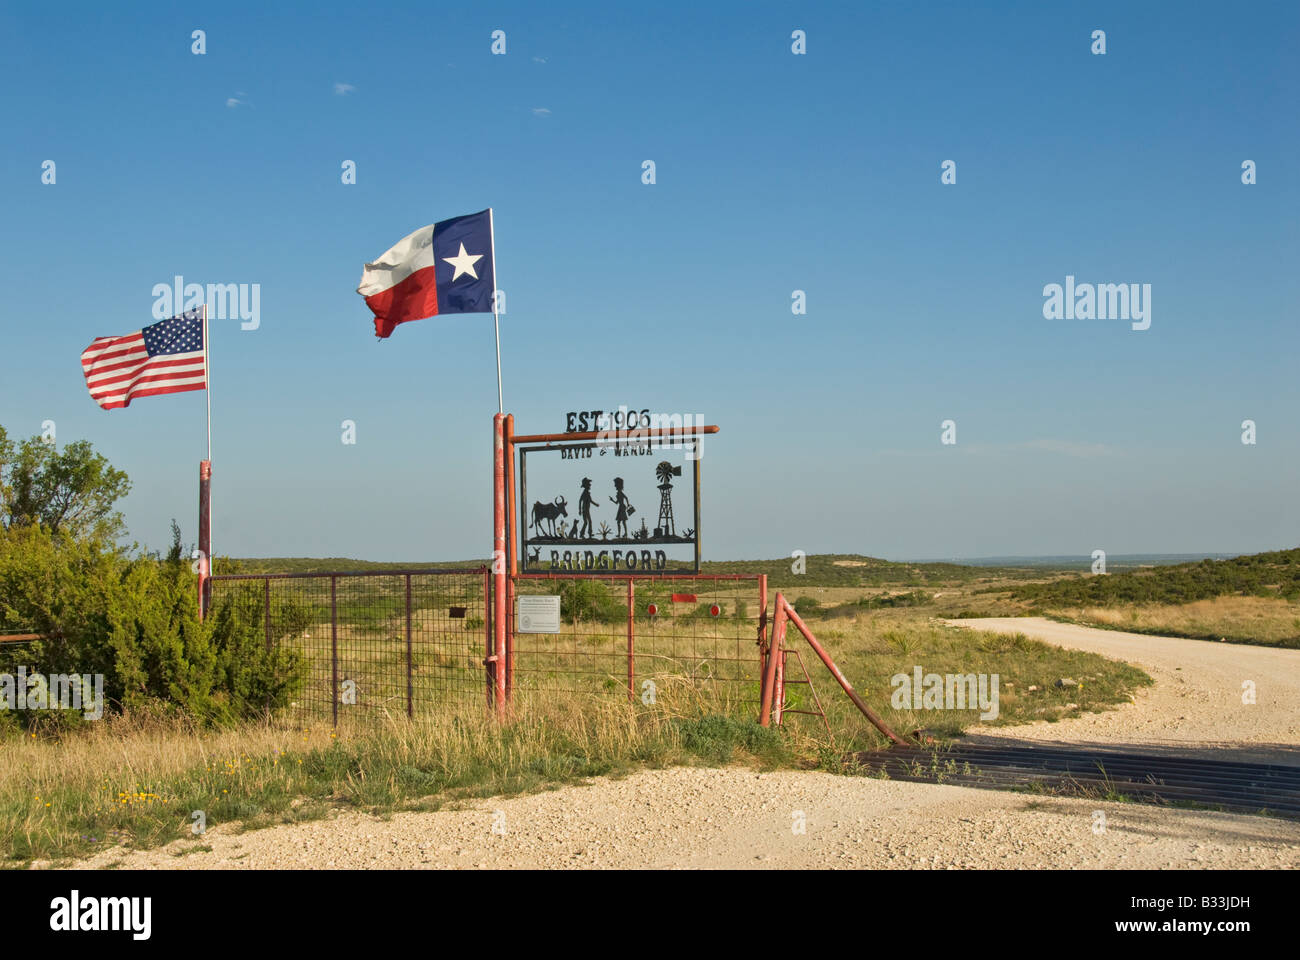 Texas Panhandle Plains Historic Ranch in continuous agricultural operation by same family for over 100 years sign flags Stock Photo